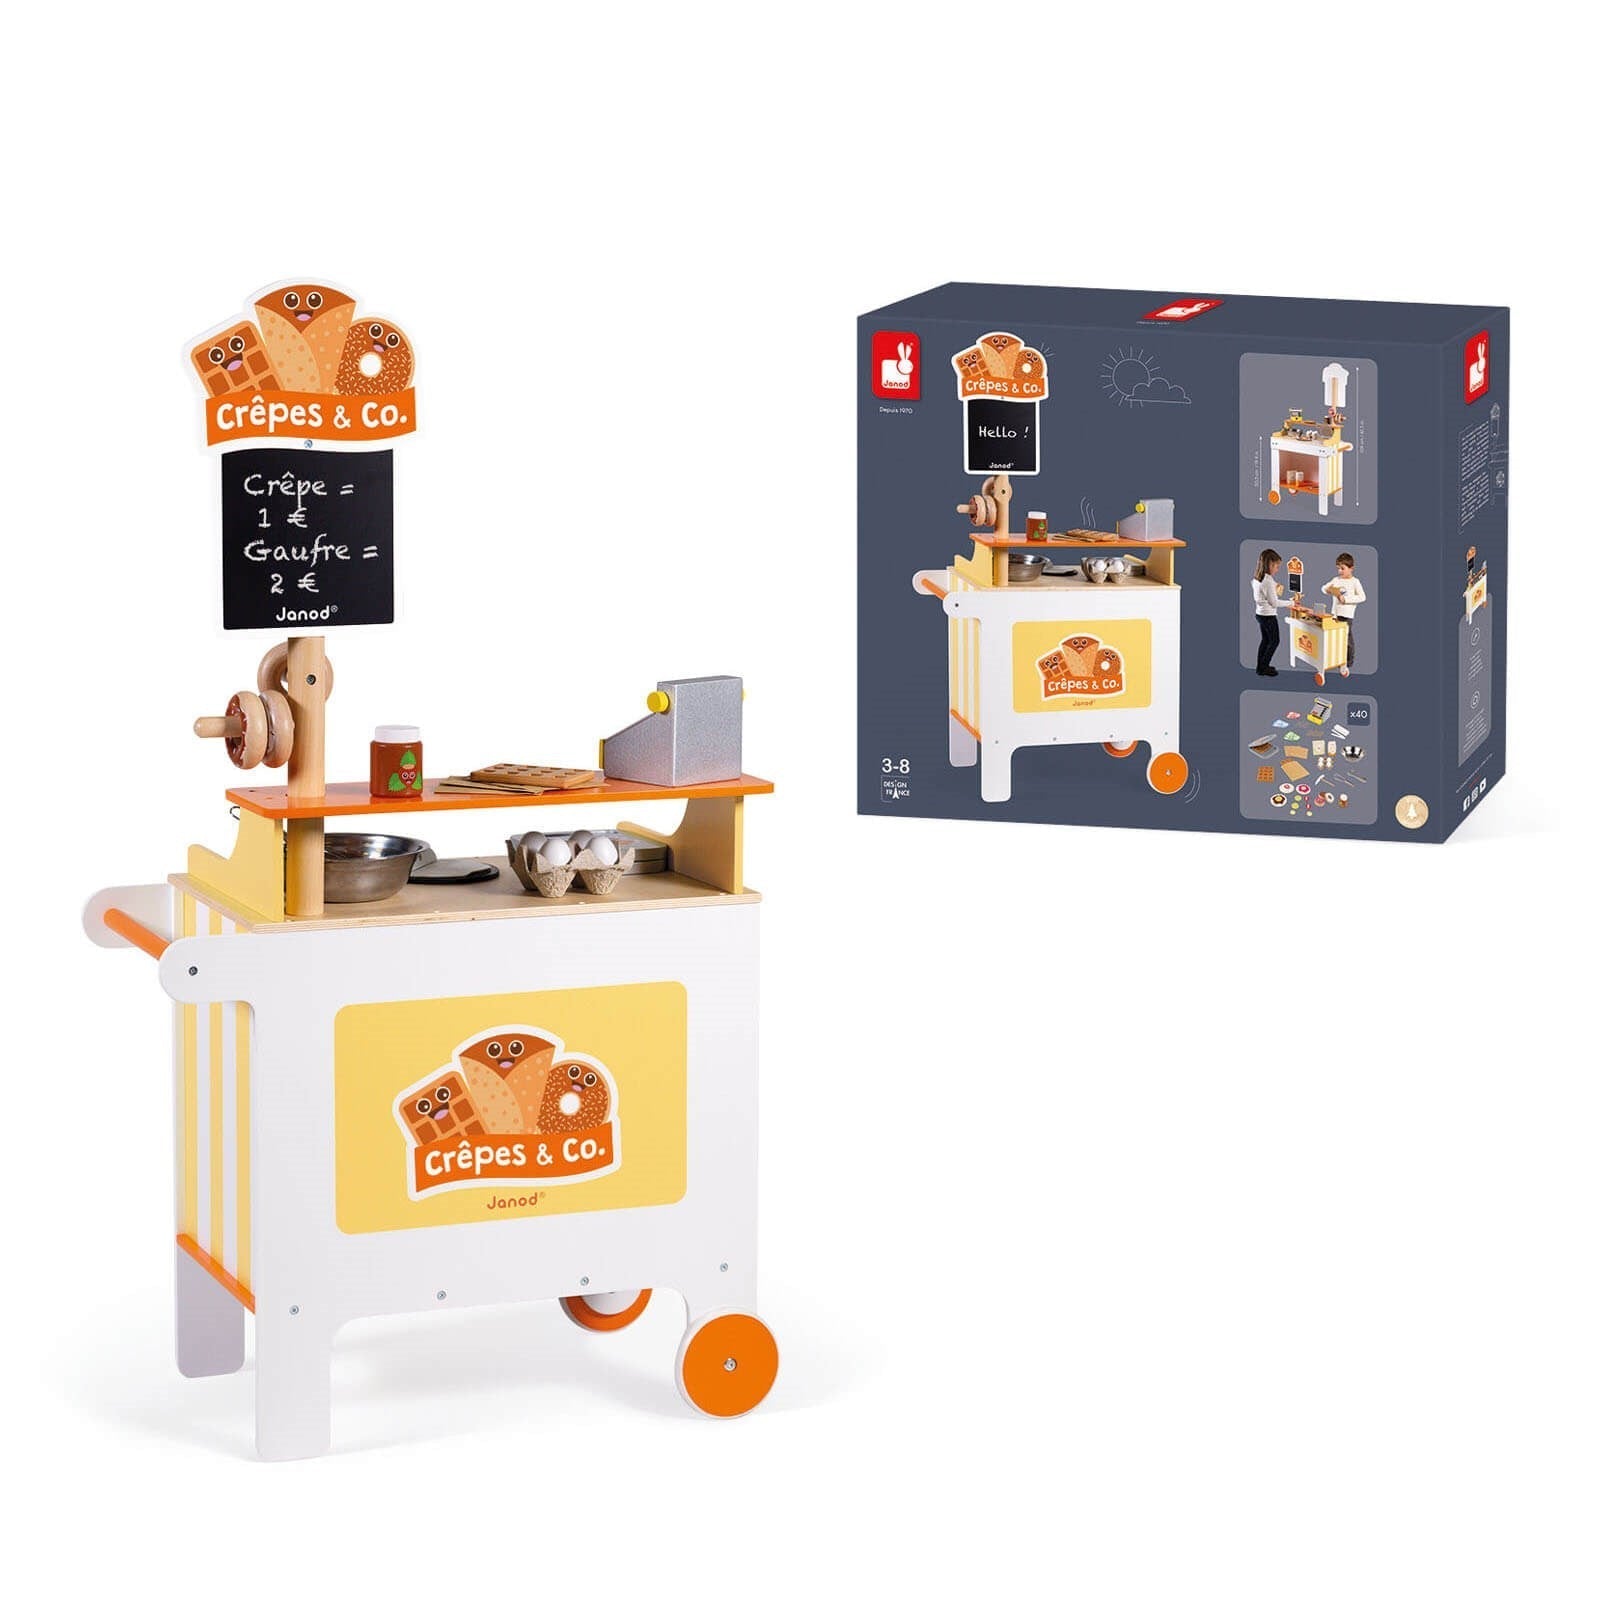 Miniature Kitchen That Works REAL 2in1 Baking & Cooking Kitchen Set Tiny Baking  Mini Food Cooking Cookwares Peach 